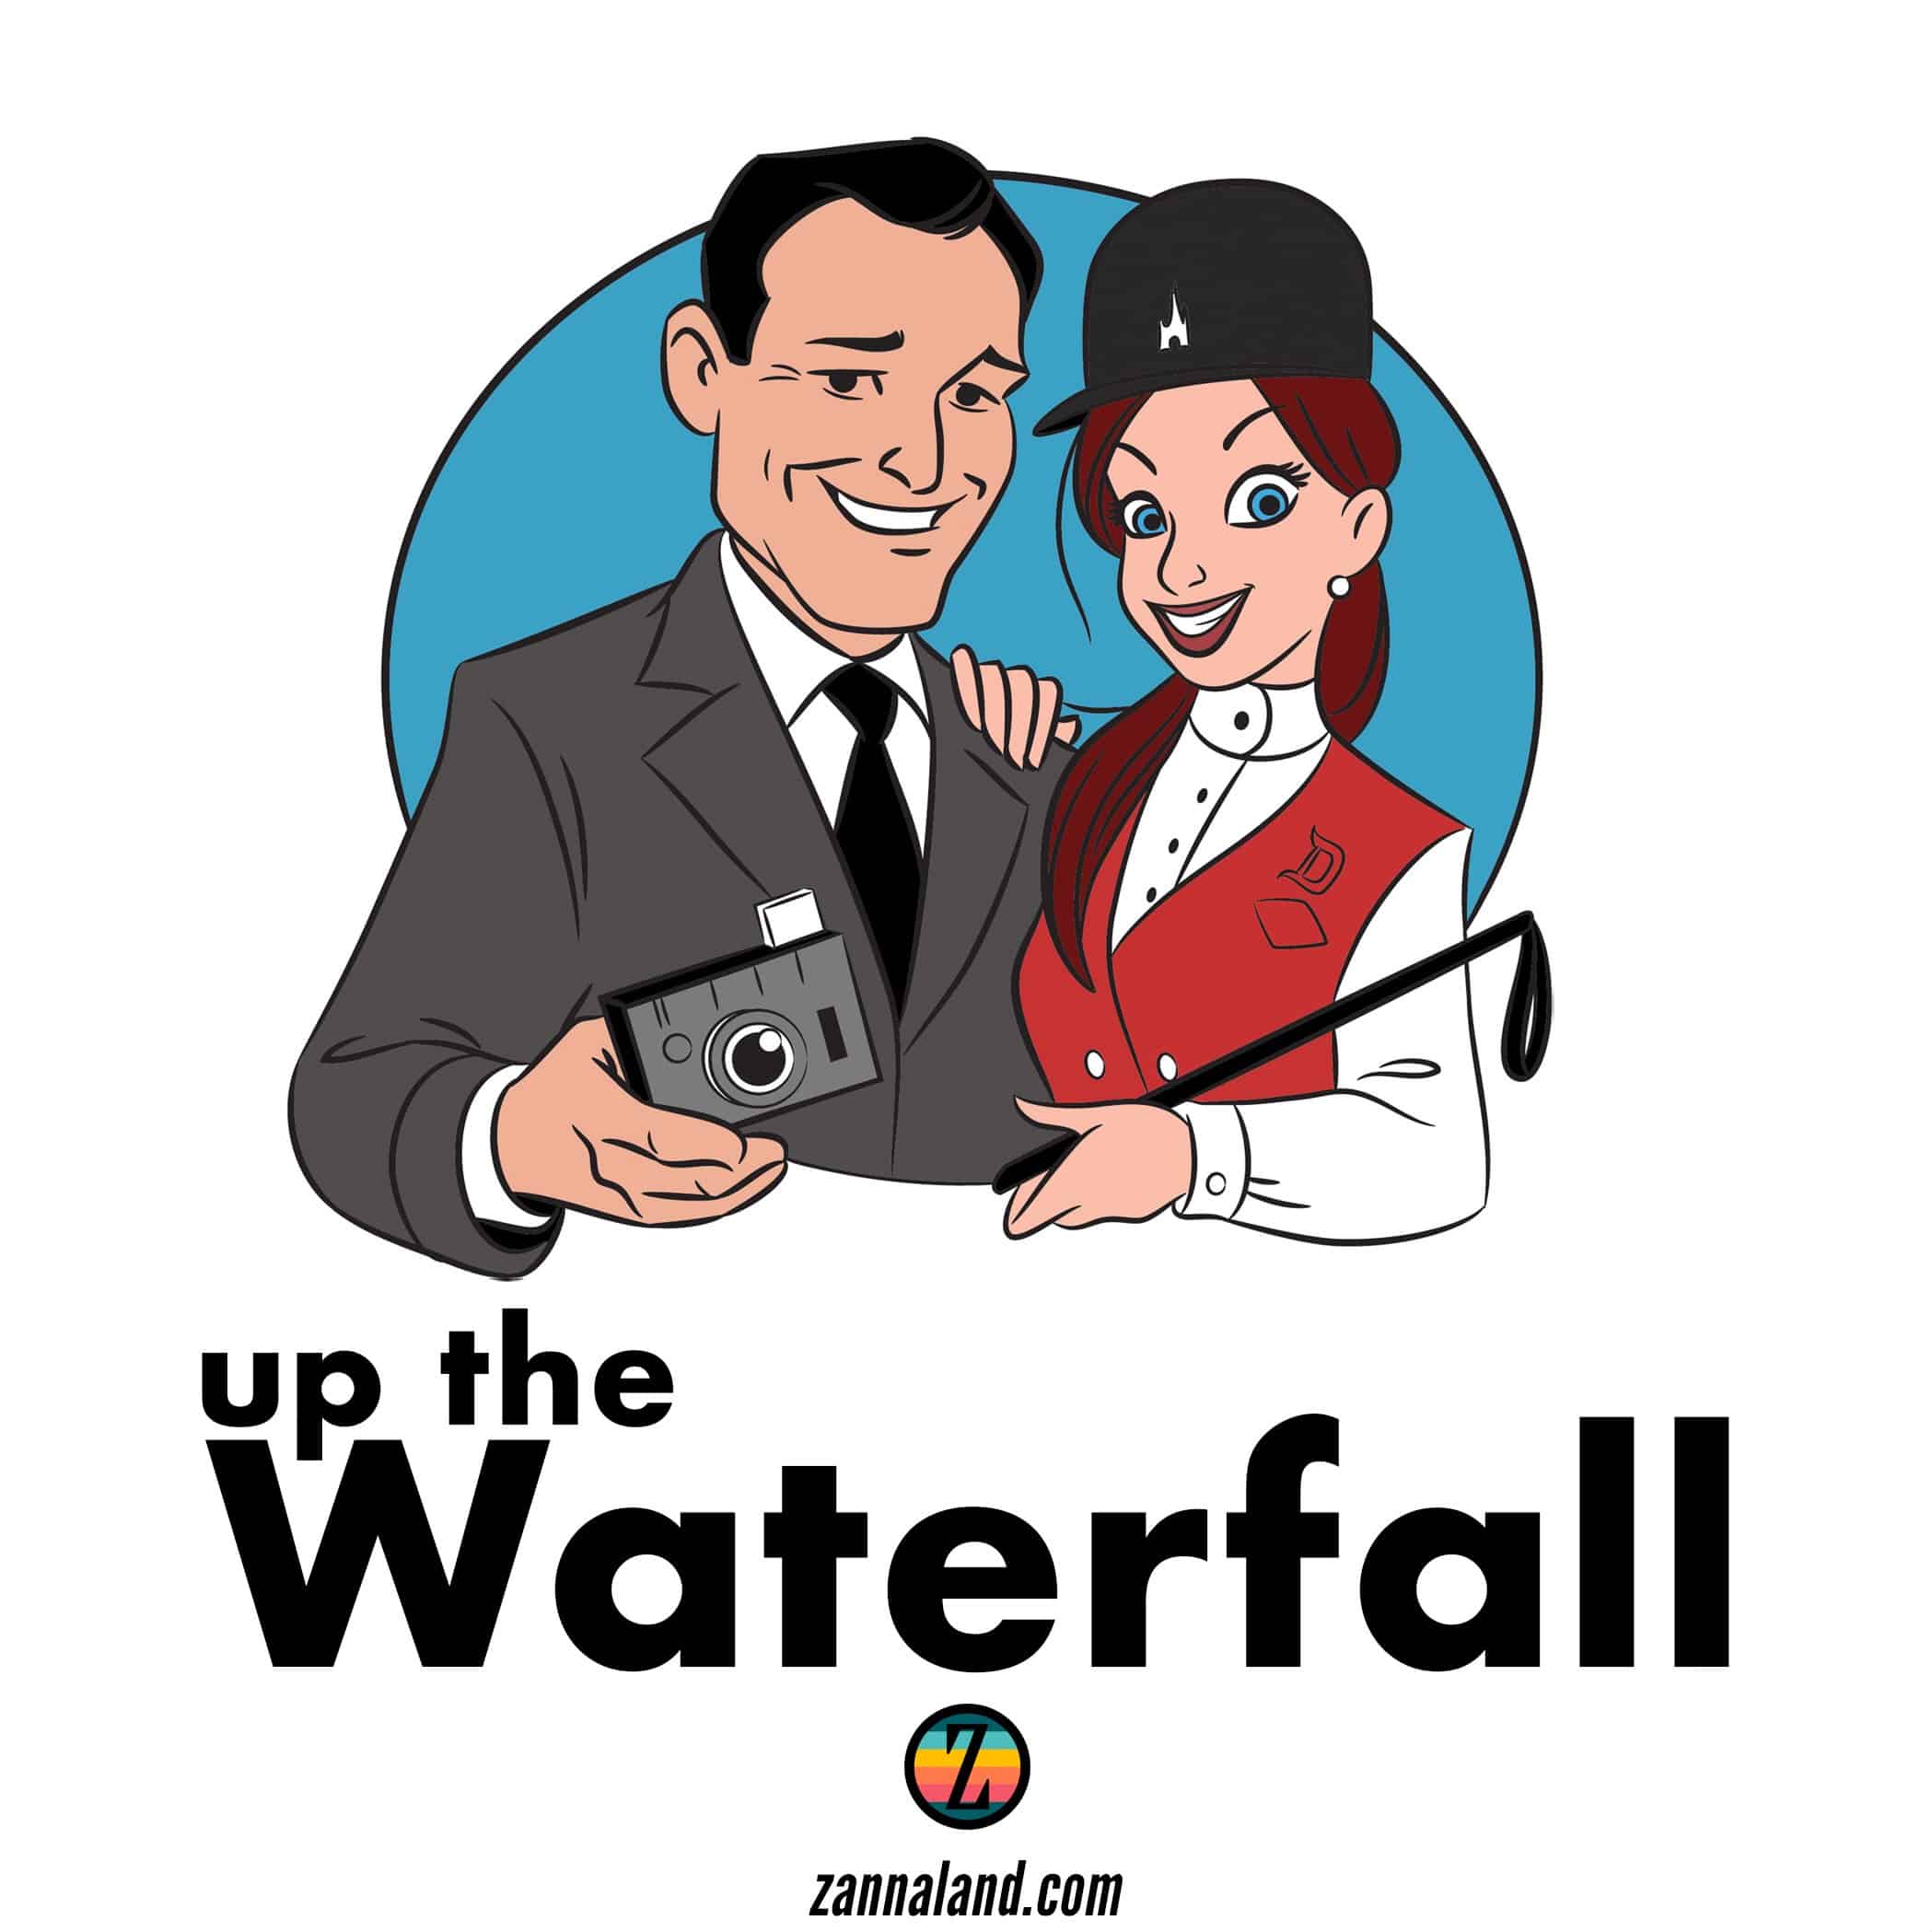 Up the Waterfall logo